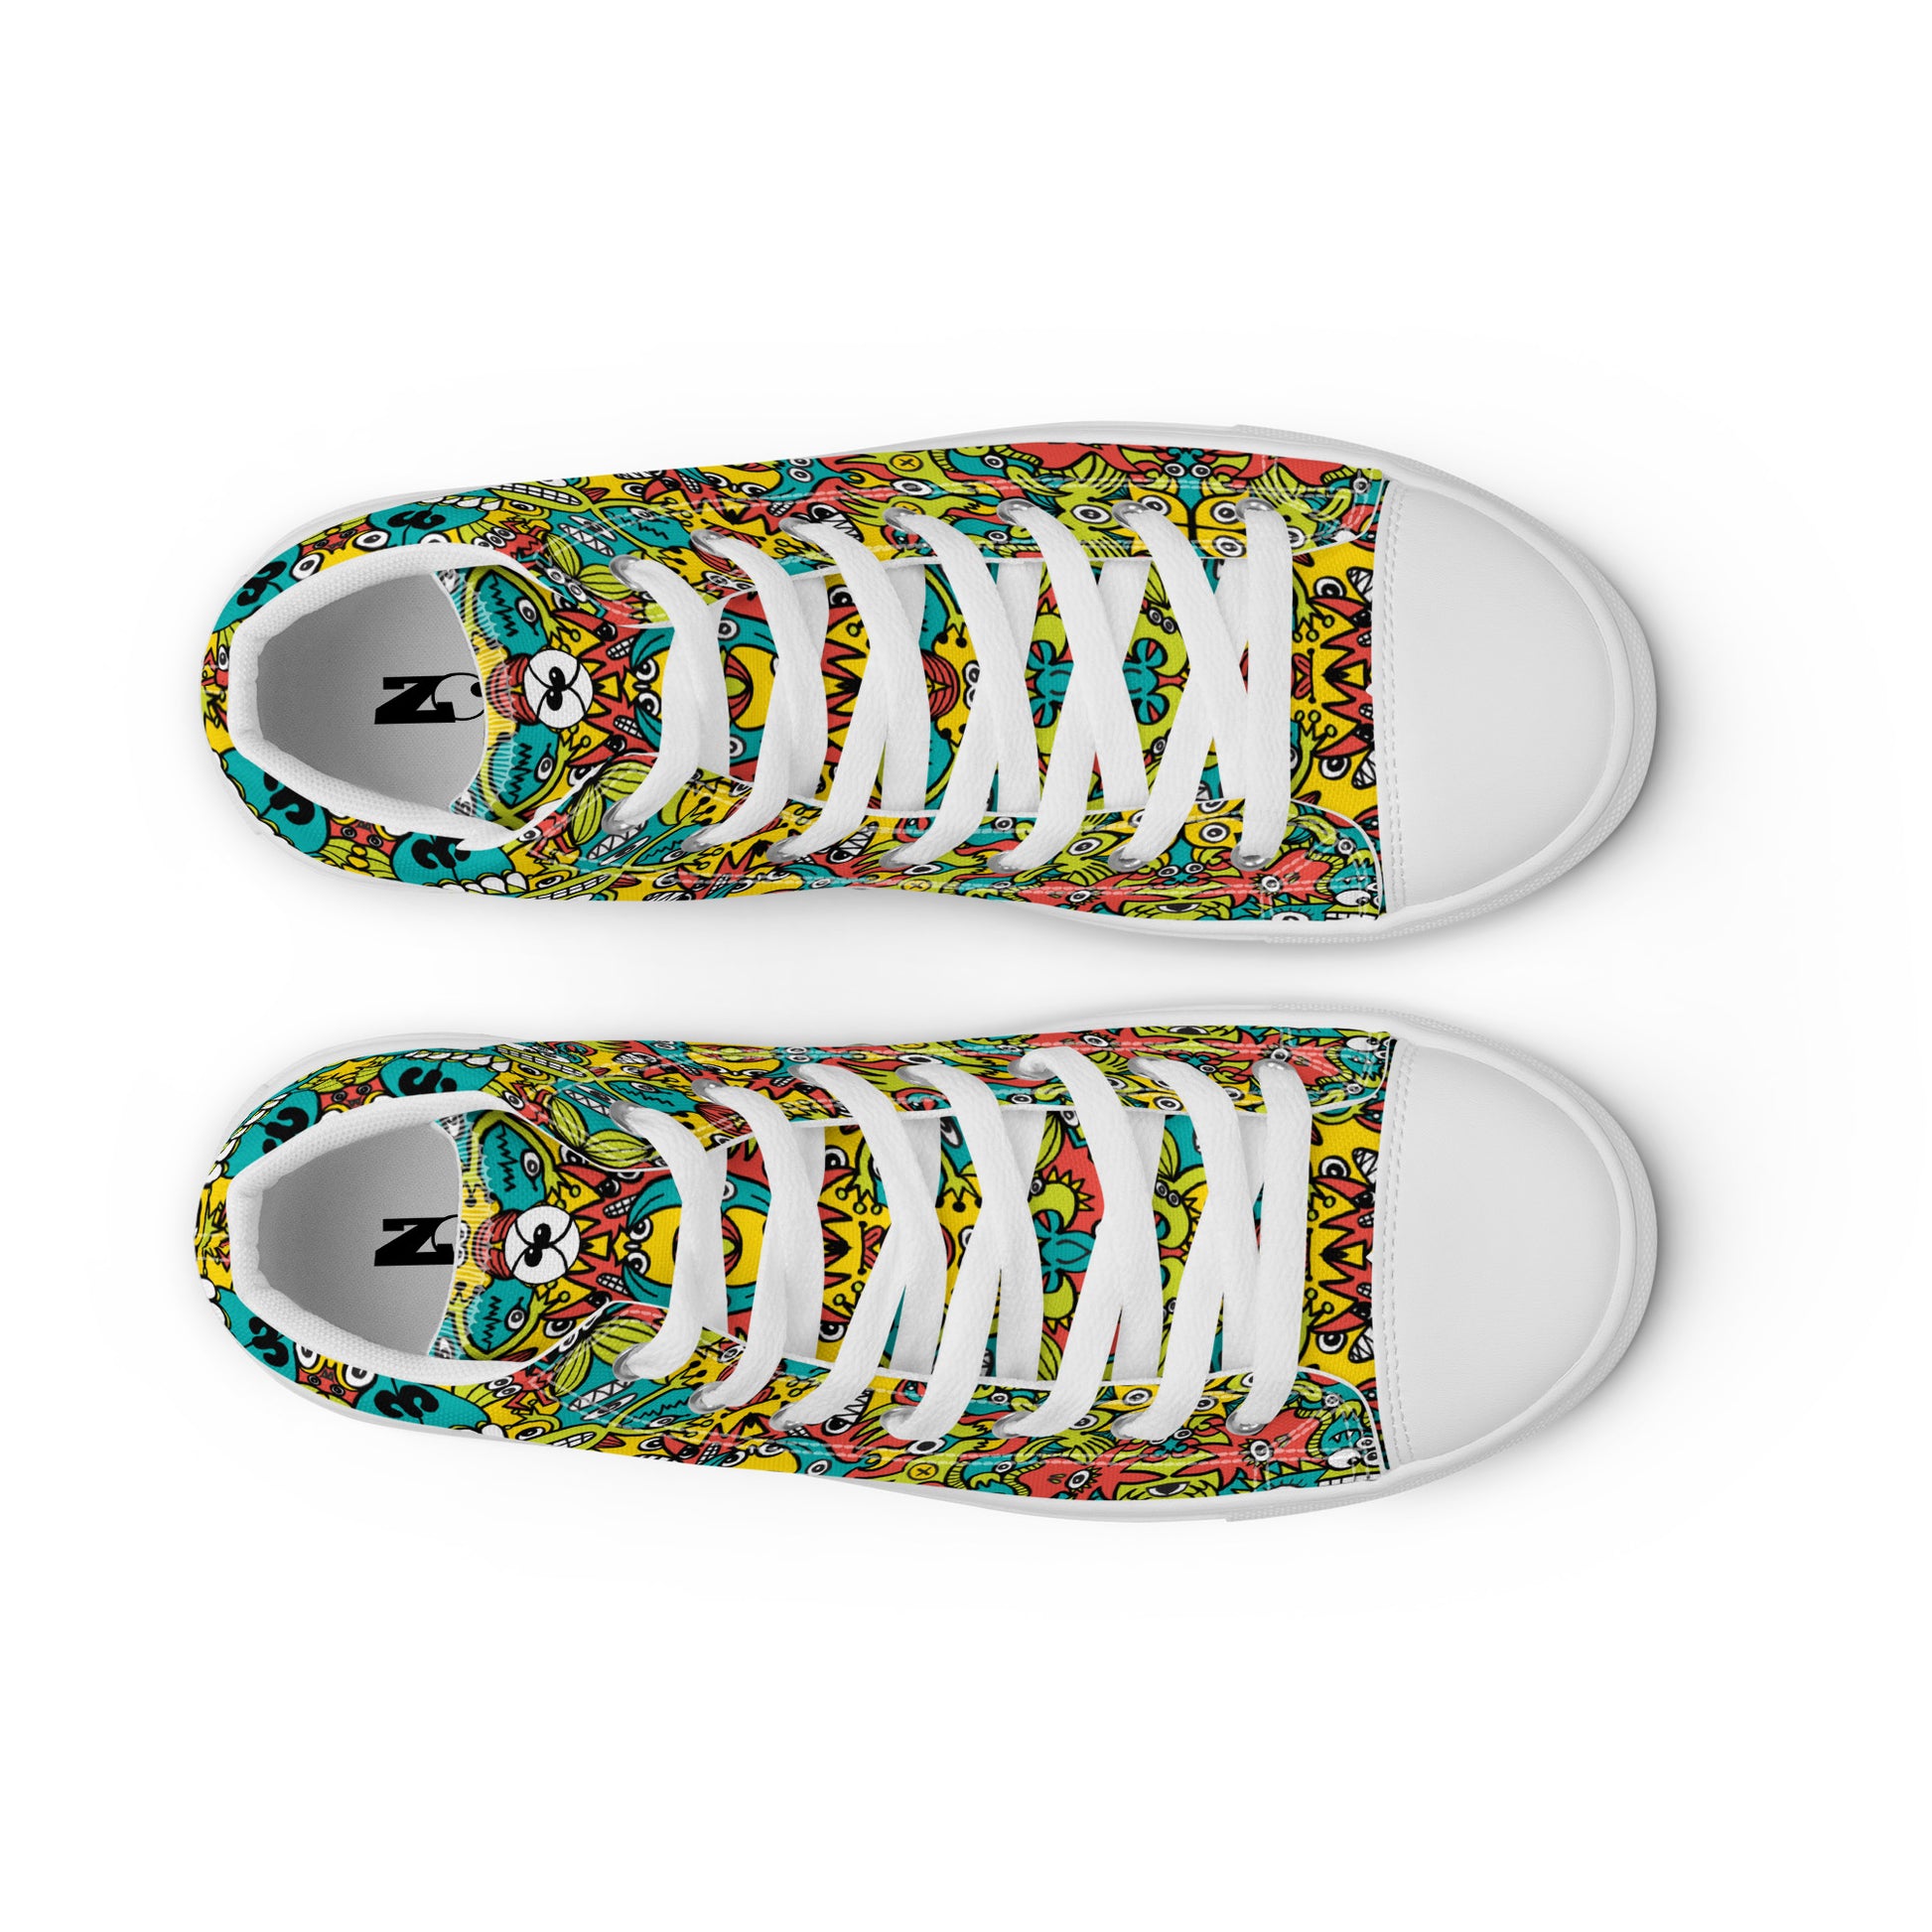 Doodle Dreamscape: Cosmic Critter Carnival - Women’s high top canvas shoes. Top view